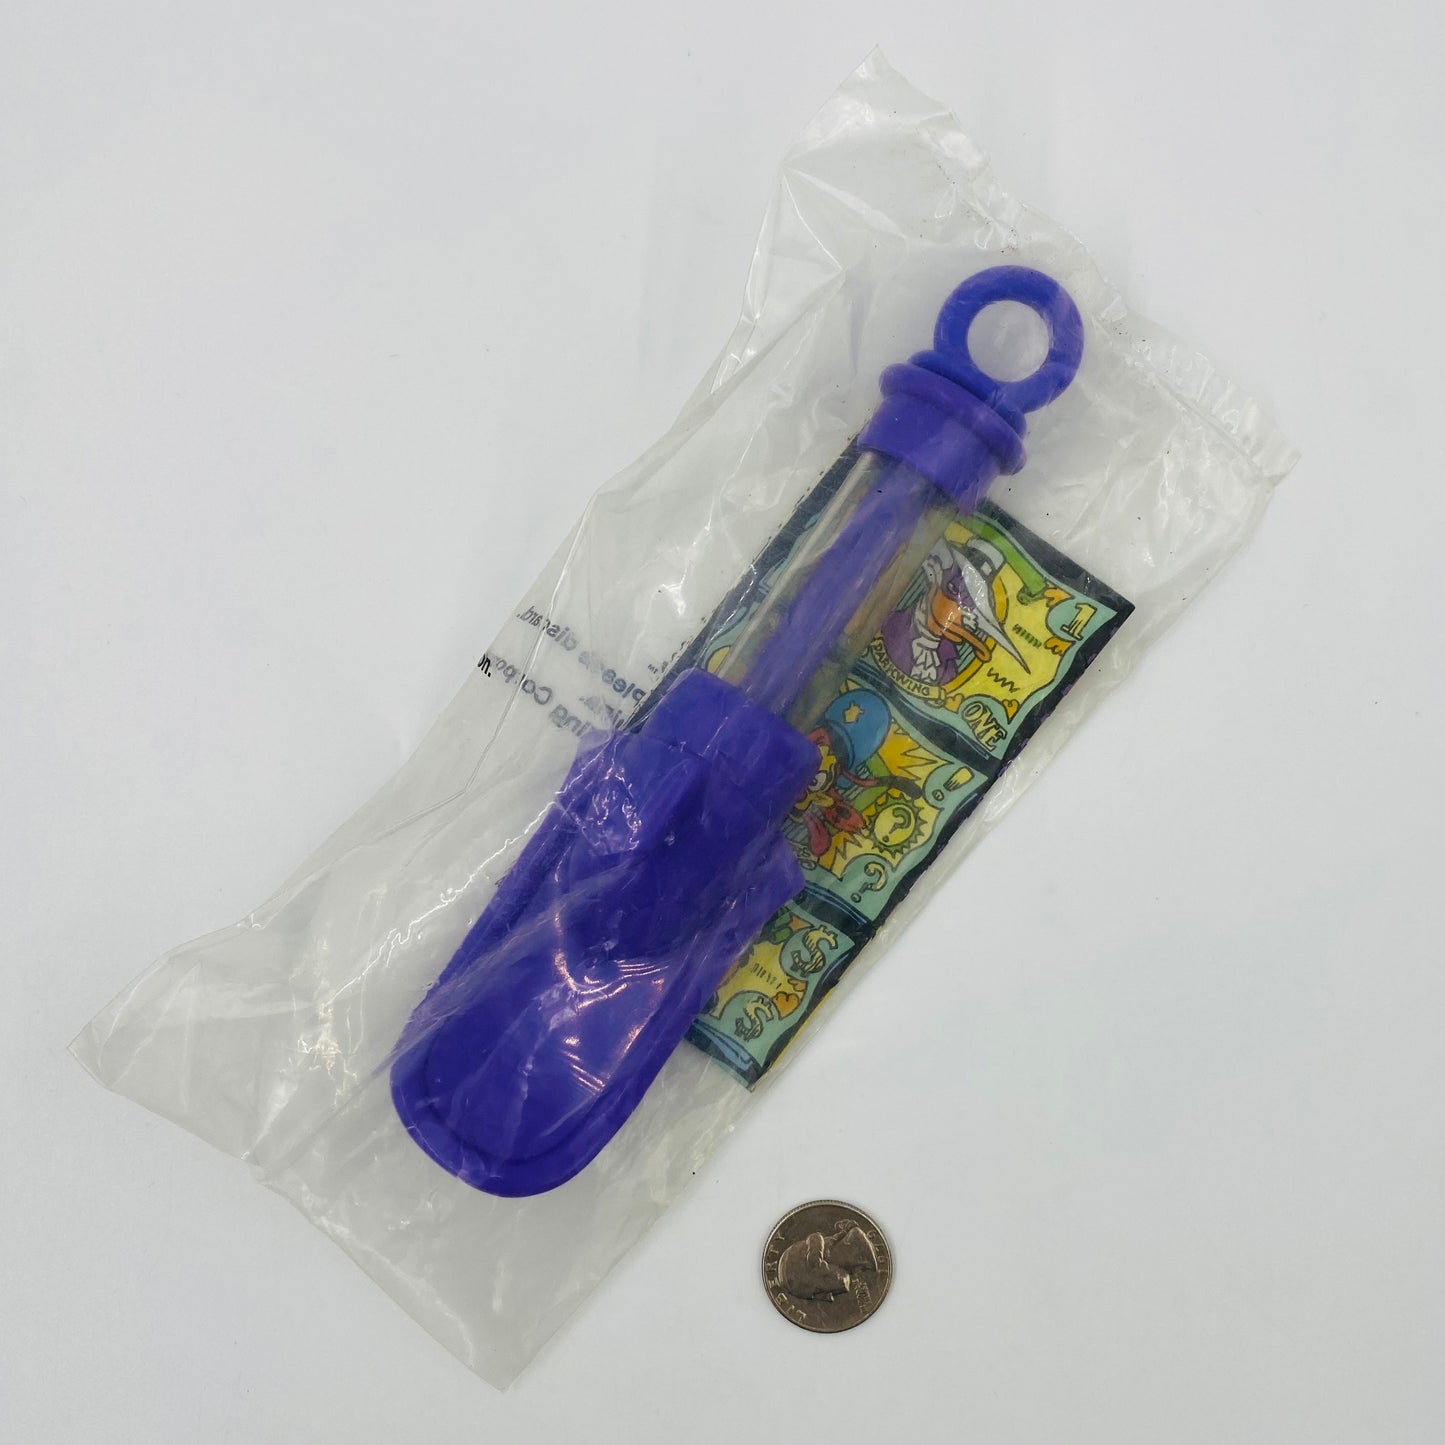 Disney Afternoon Darkwing Duck squirter Burger King Kids' Meal toy (1994) bagged